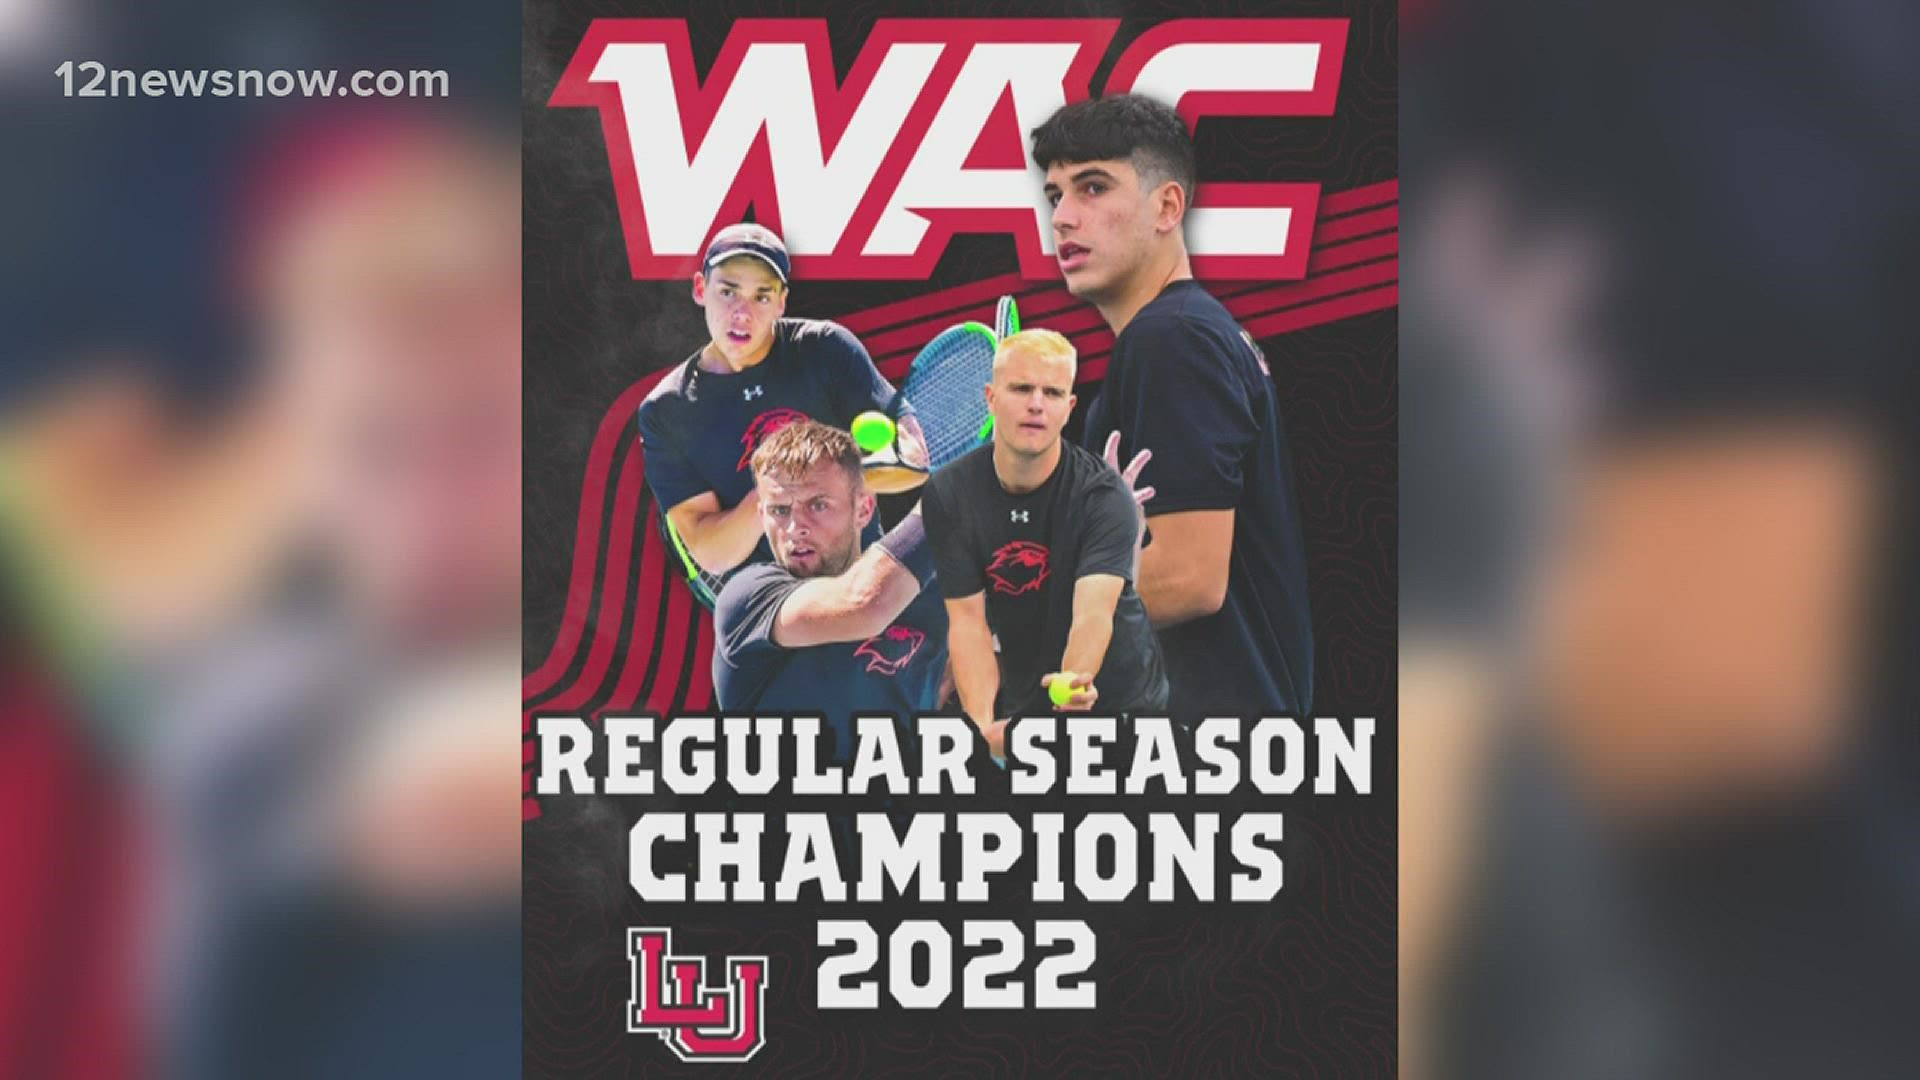 One day after Lamar announced it was leaving the WAC Lamar Men's Tennis earns its first WAC Regular Season Championship.